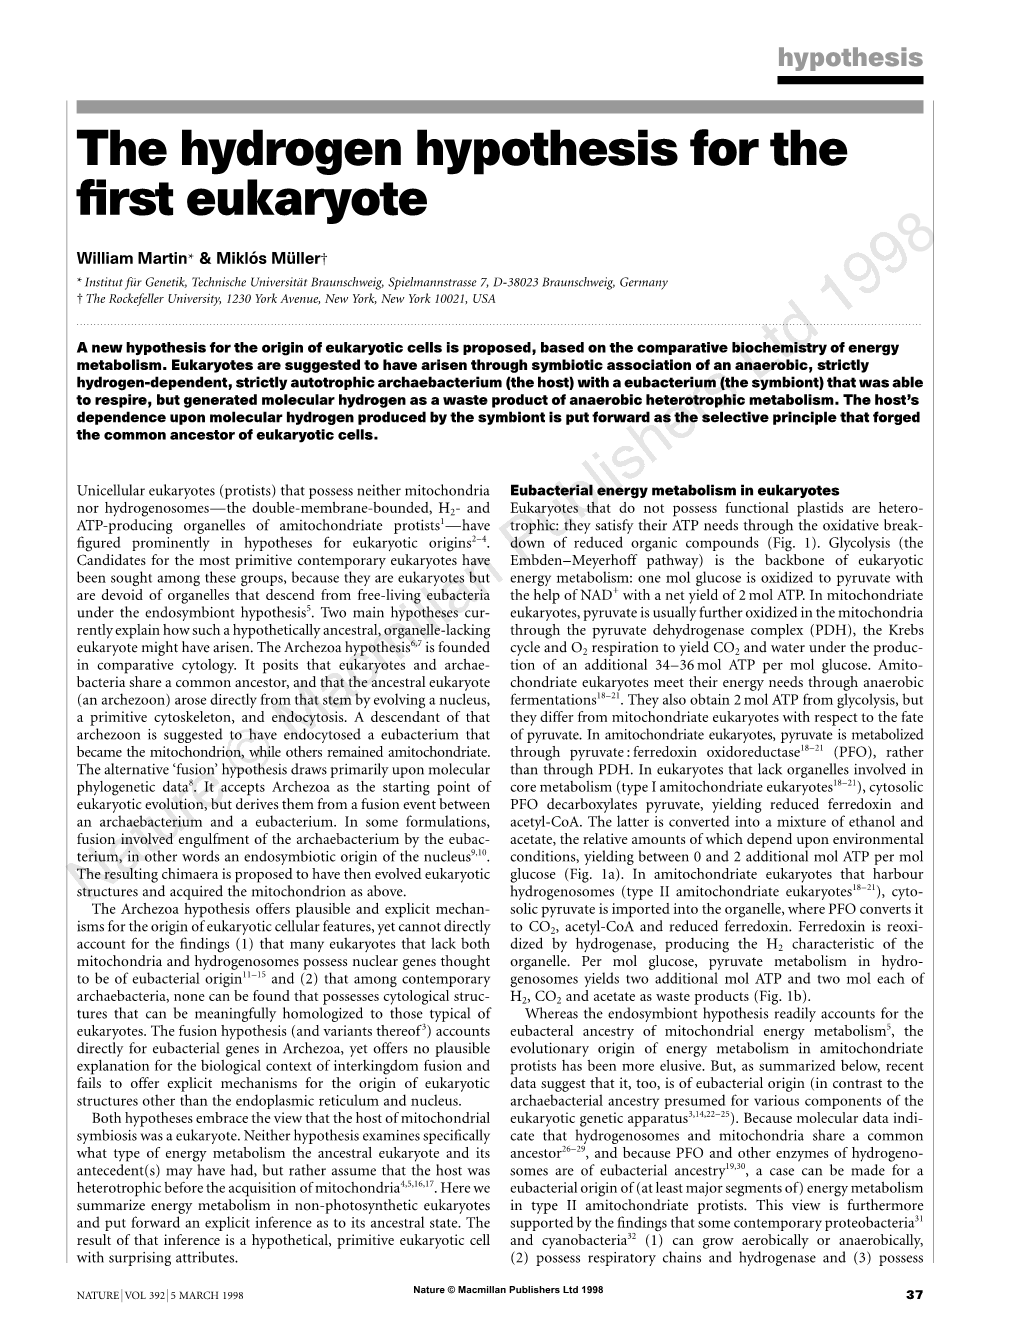 The Hydrogen Hypothesis for the First Eukaryote